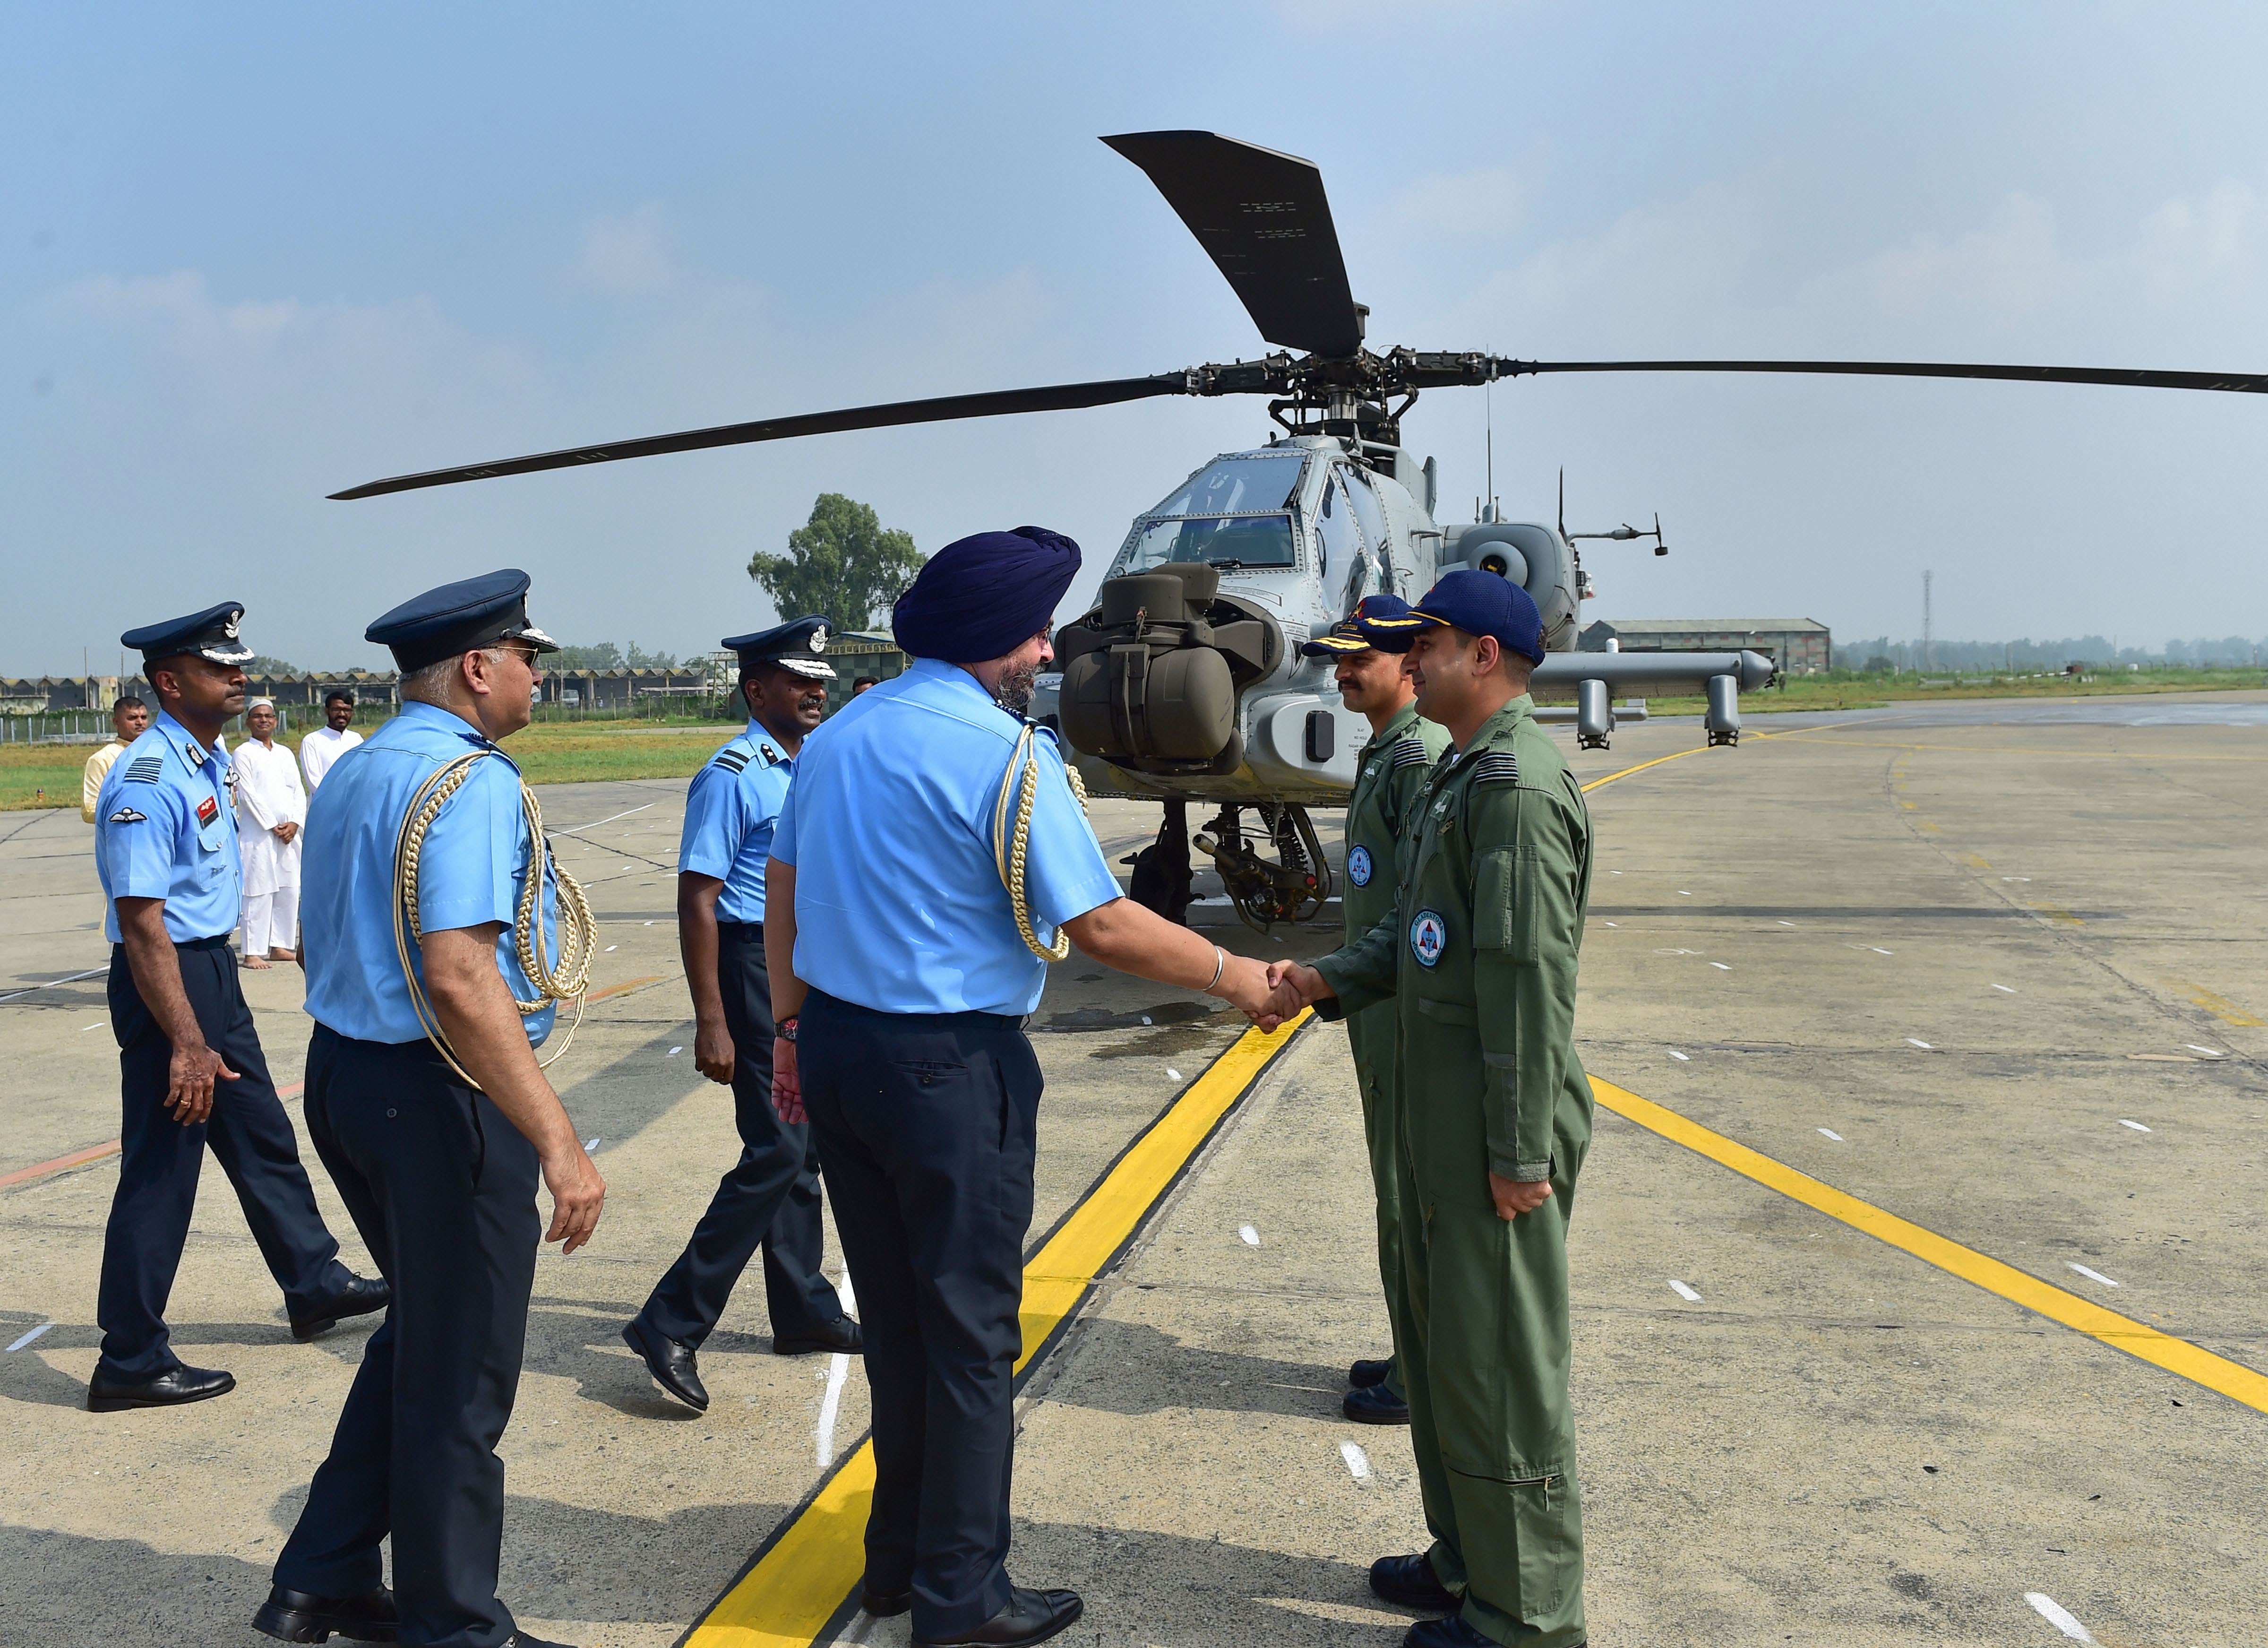 Air Chief Marshal Birender Singh Dhanoa greets the pilots of an Apache AH-64E attack helicopter during its induction - PTI